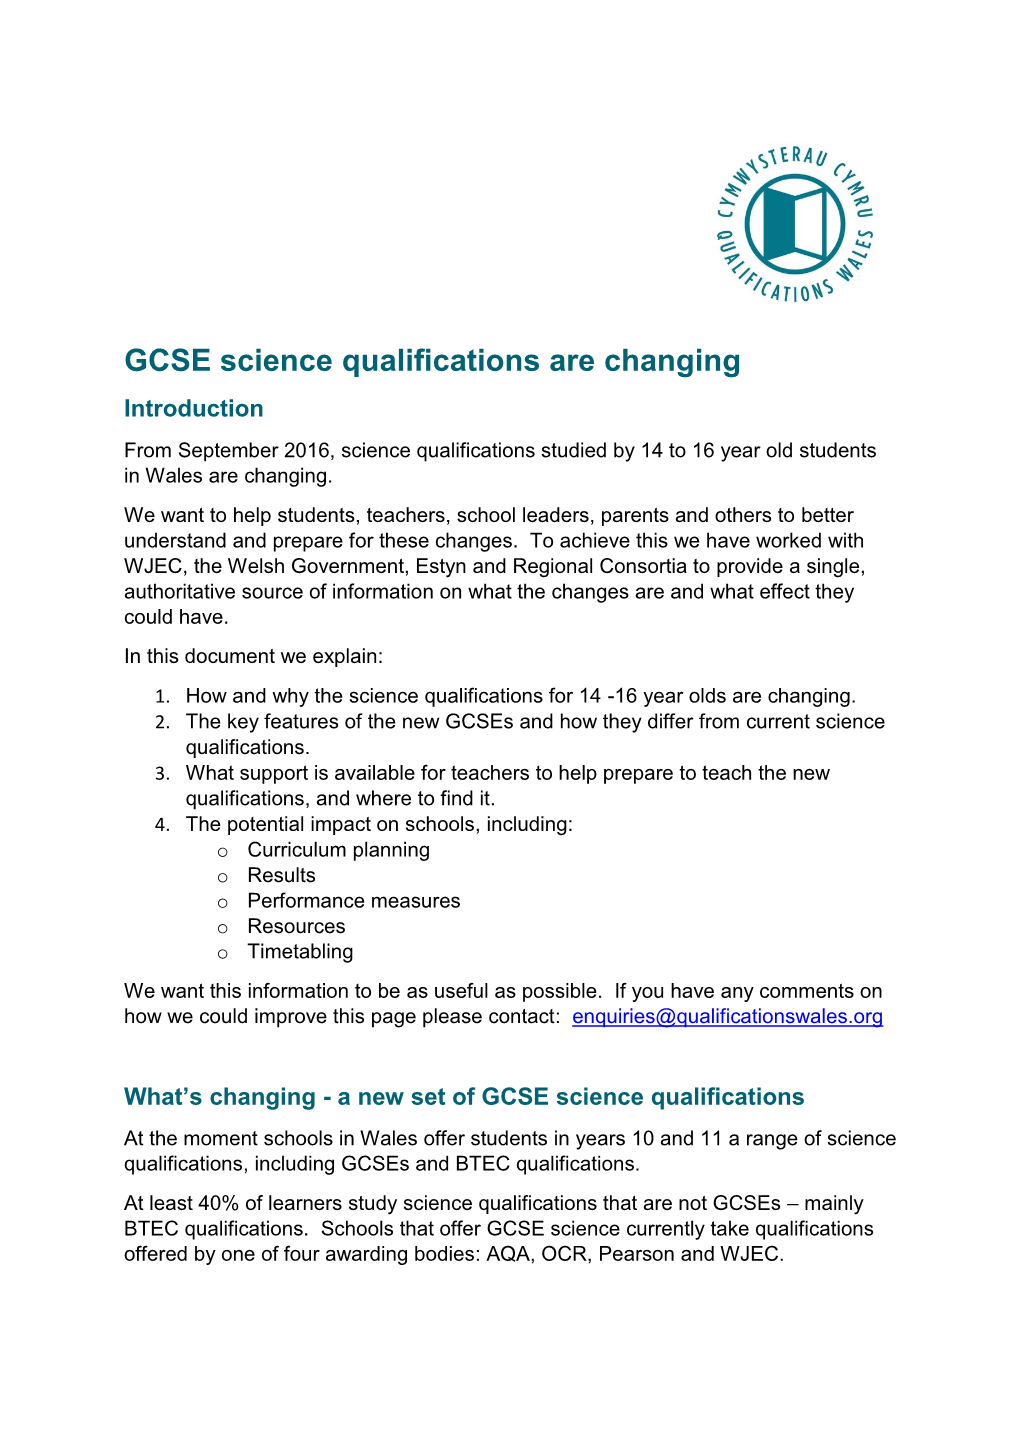 GCSE Science Qualifications Are Changing Introduction from September 2016, Science Qualifications Studied by 14 to 16 Year Old Students in Wales Are Changing